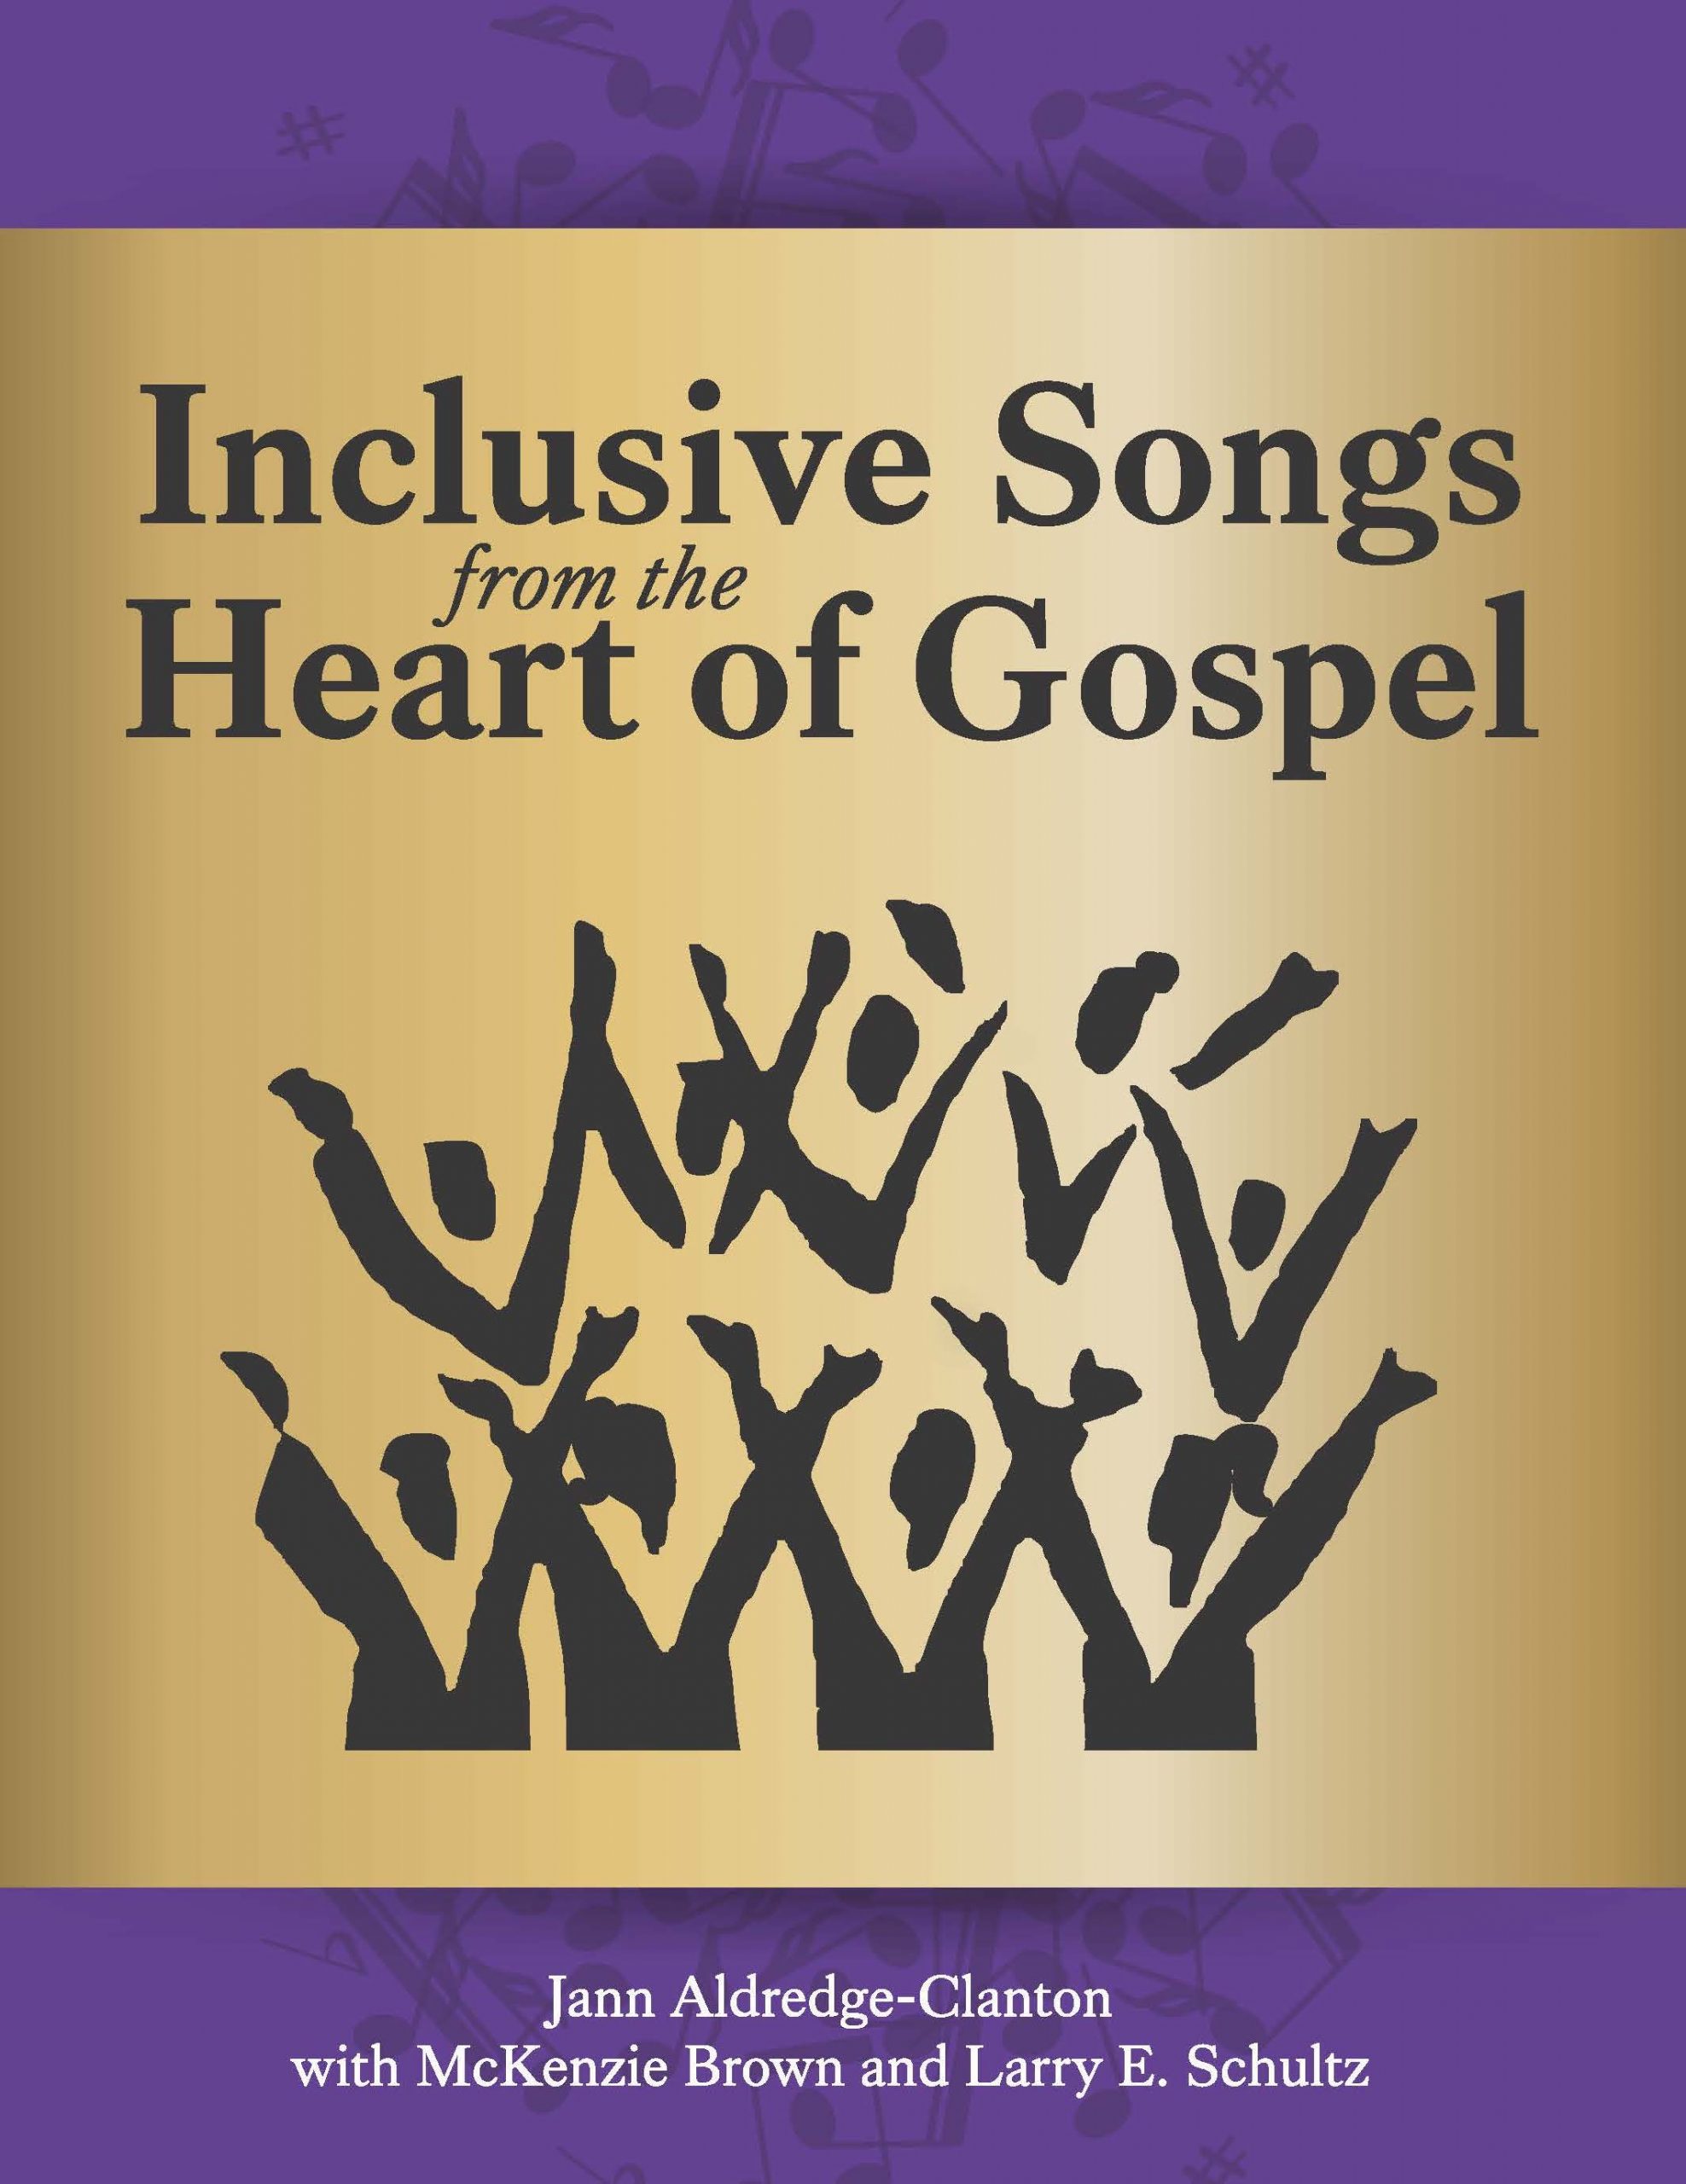 “New Life Awaits Us All,” INCLUSIVE SONGS FROM THE HEART OF GOSPEL